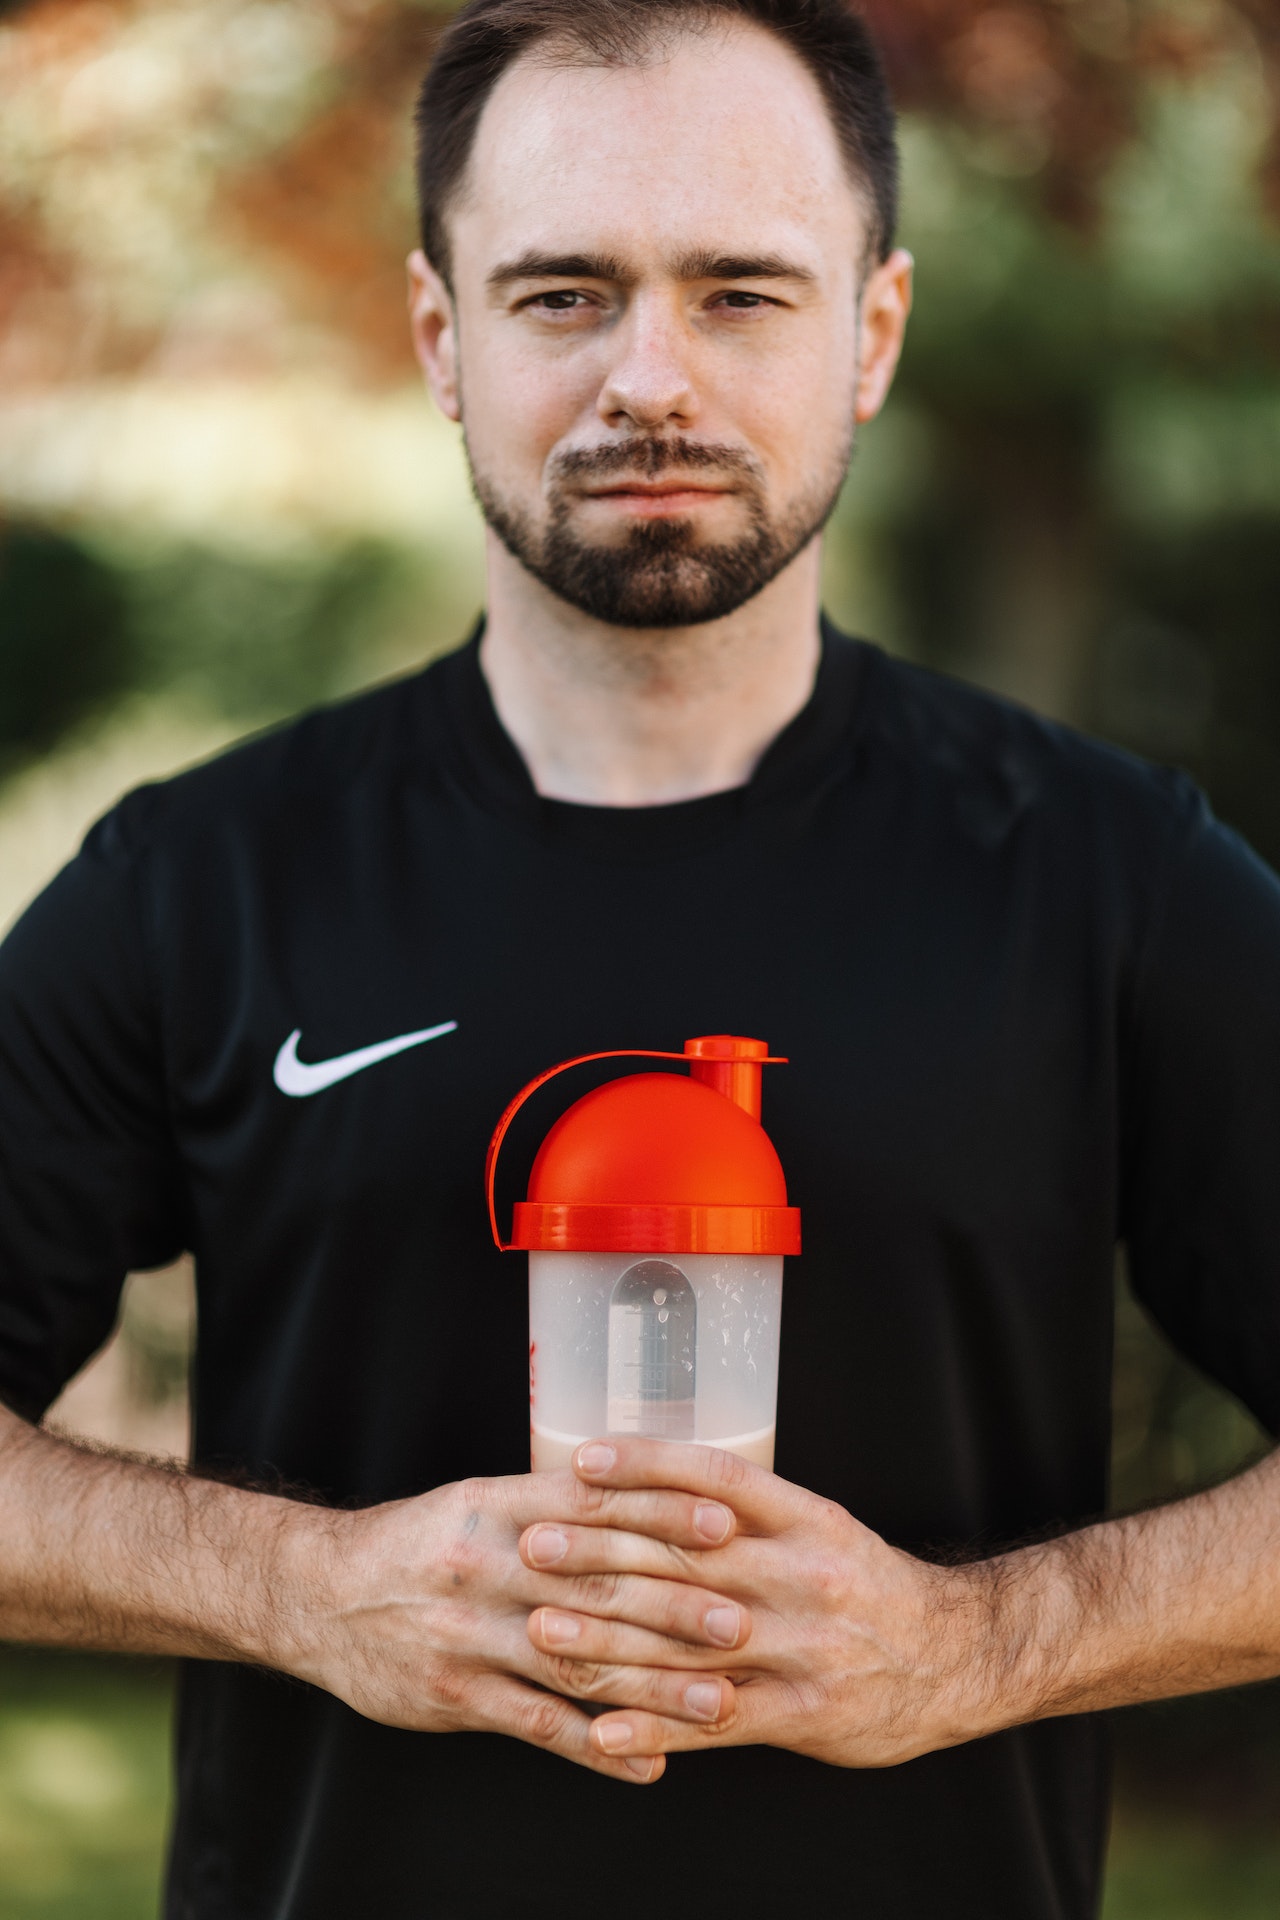 A man wearing a black Nike shirt is holding a clear plastic sports bottle with a red lid